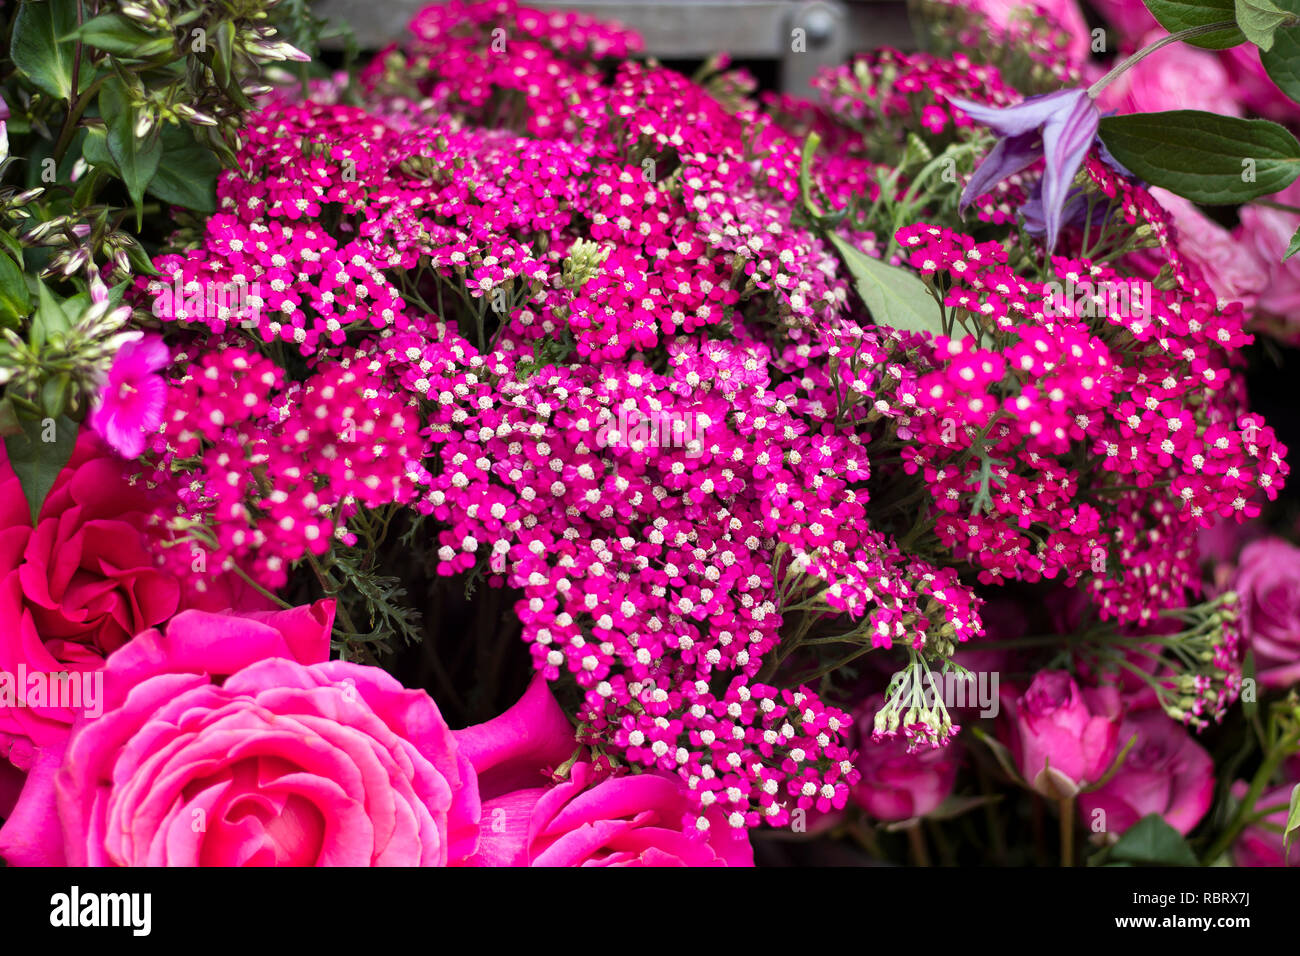 The colorful variety of flowers sold in the market in London. Stock Photo